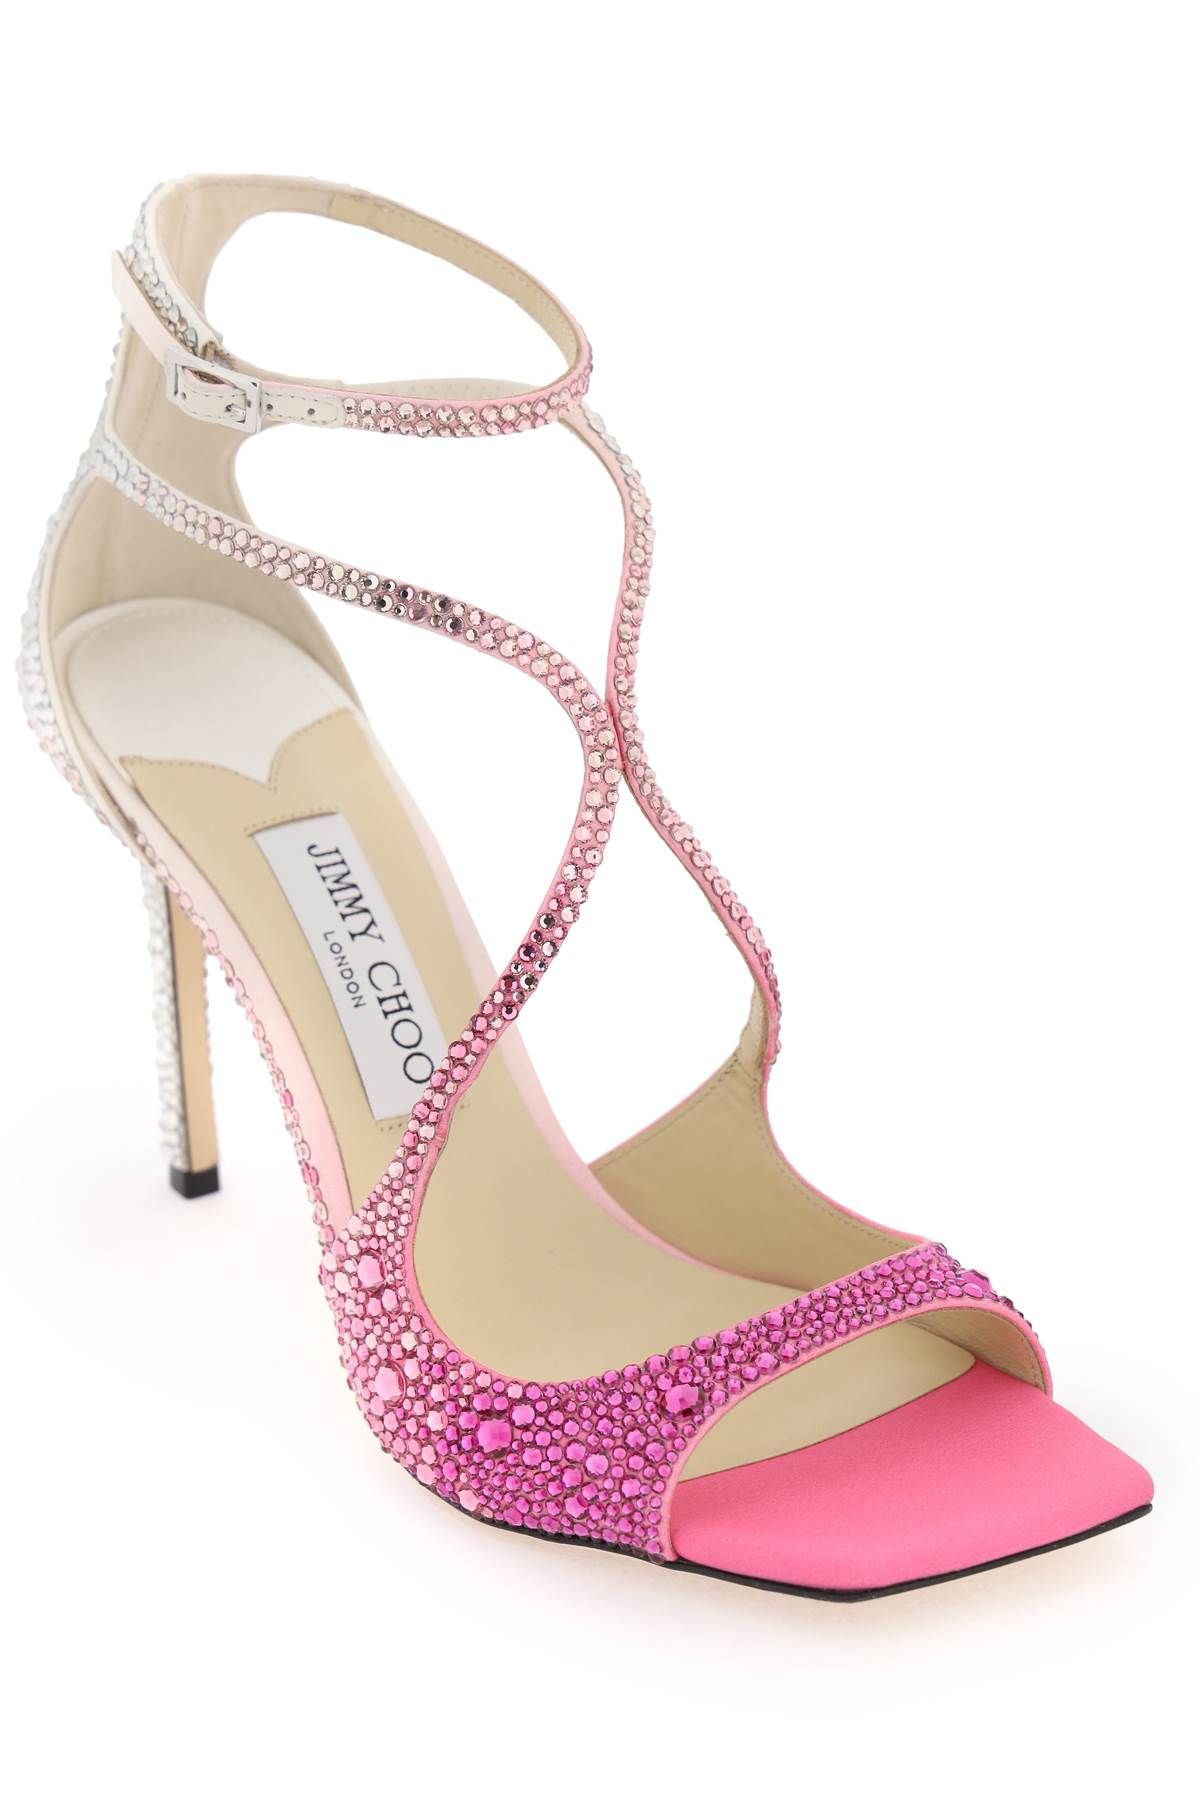 Shop Jimmy Choo Azia 95 Pumps With Crystals In Fuchsia,pink